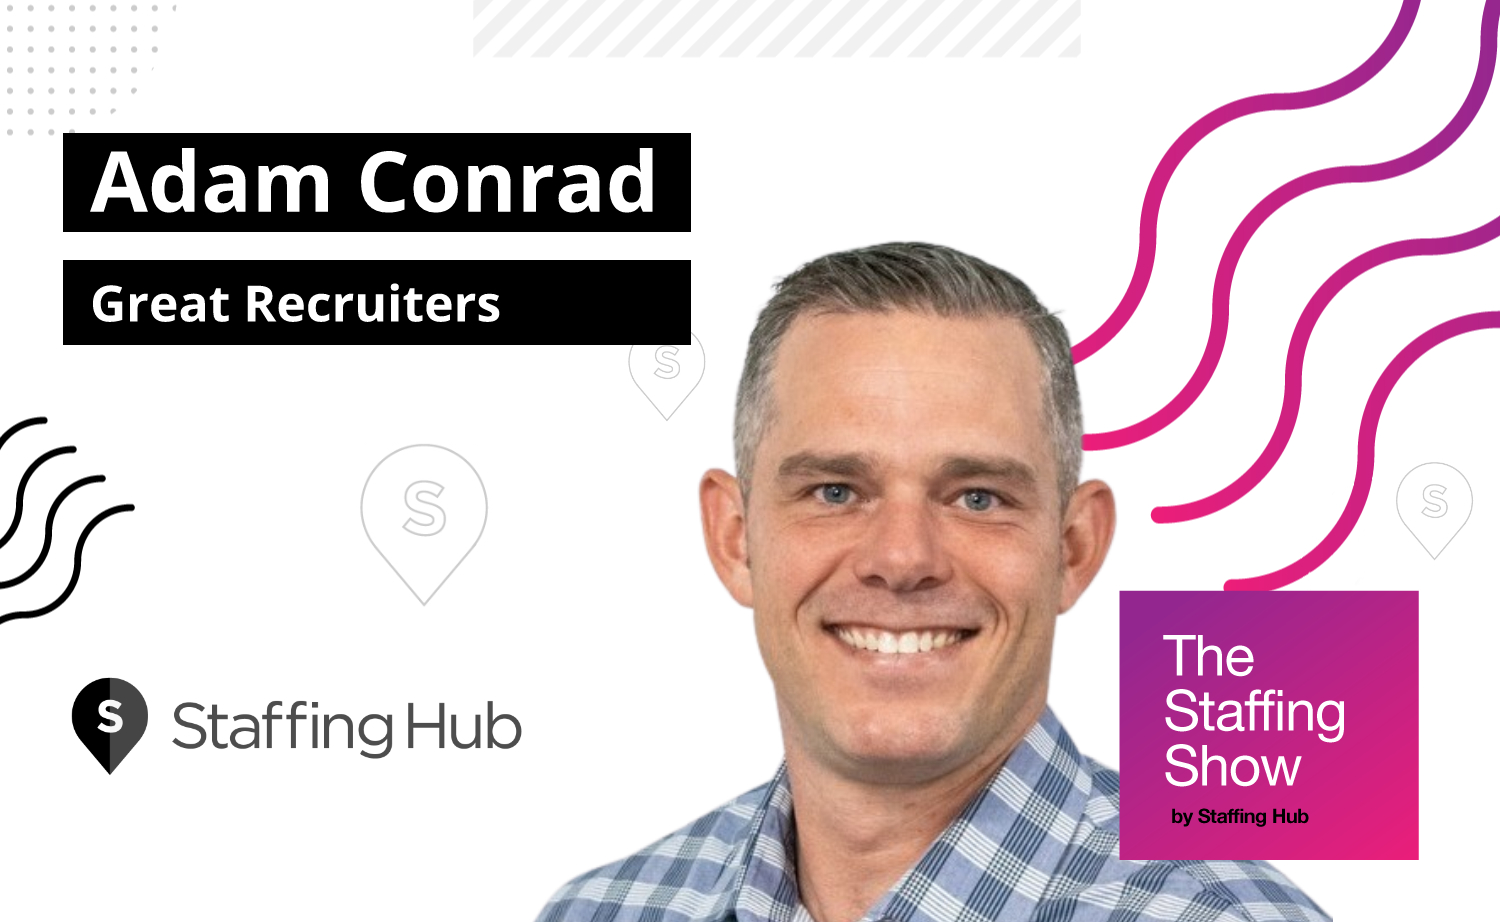 Adam Conrad, CXO and Founder of Great Recruiters, on Being Resilient and Embracing Discomfort